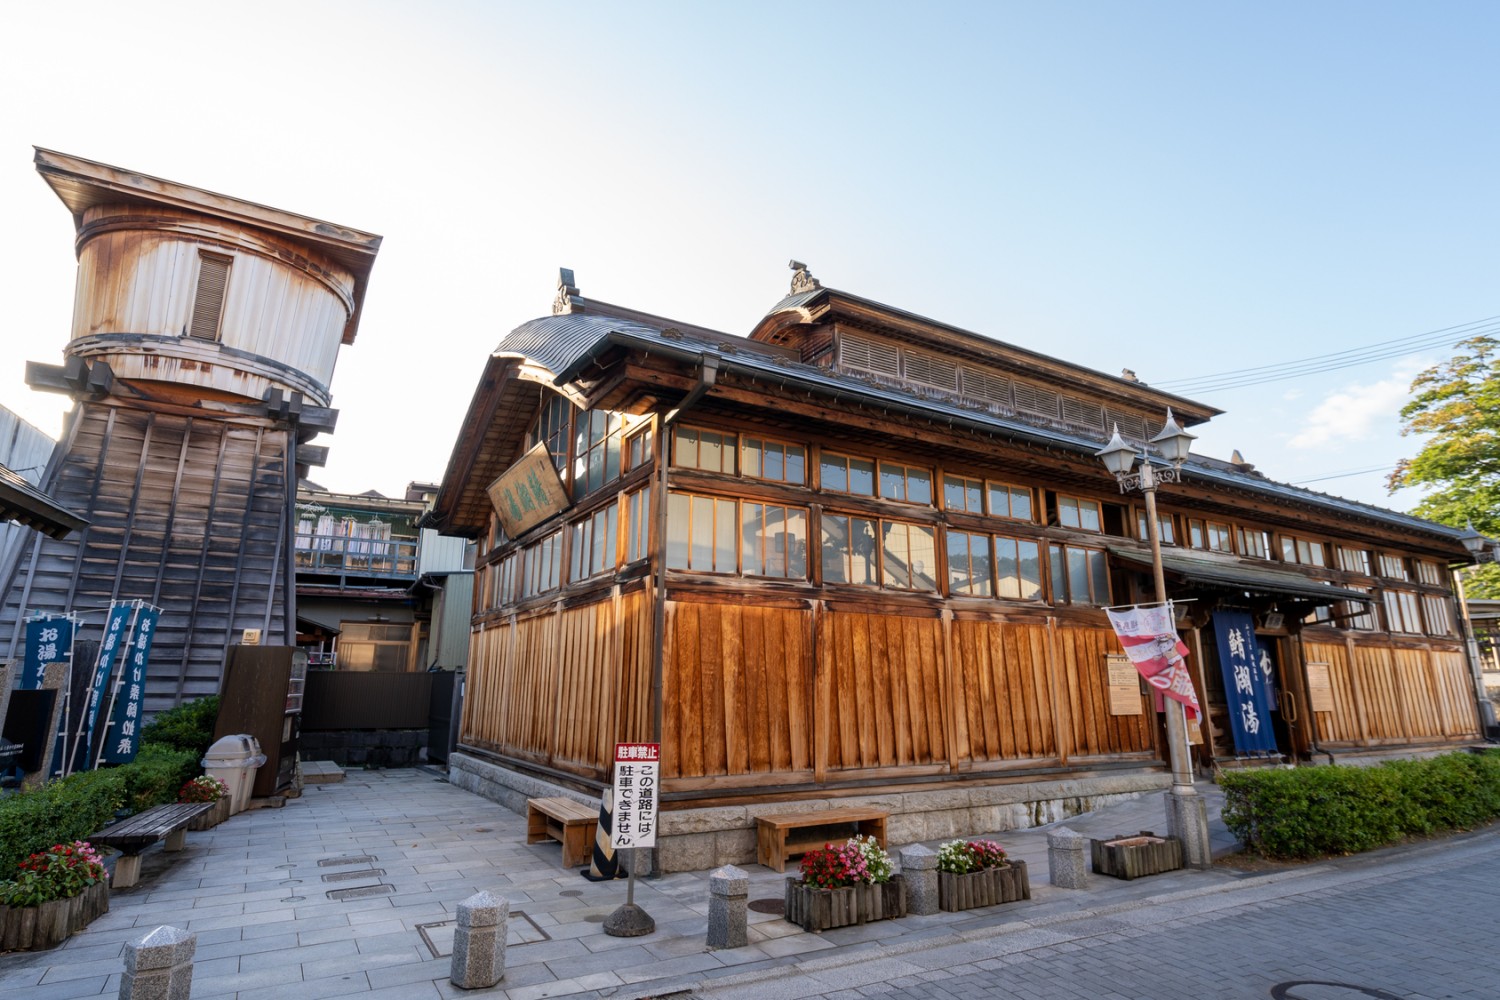 Iizaka Onsen Guide | ONSENISTA - Specialized media for Japanese Onsen(hot springs) - 